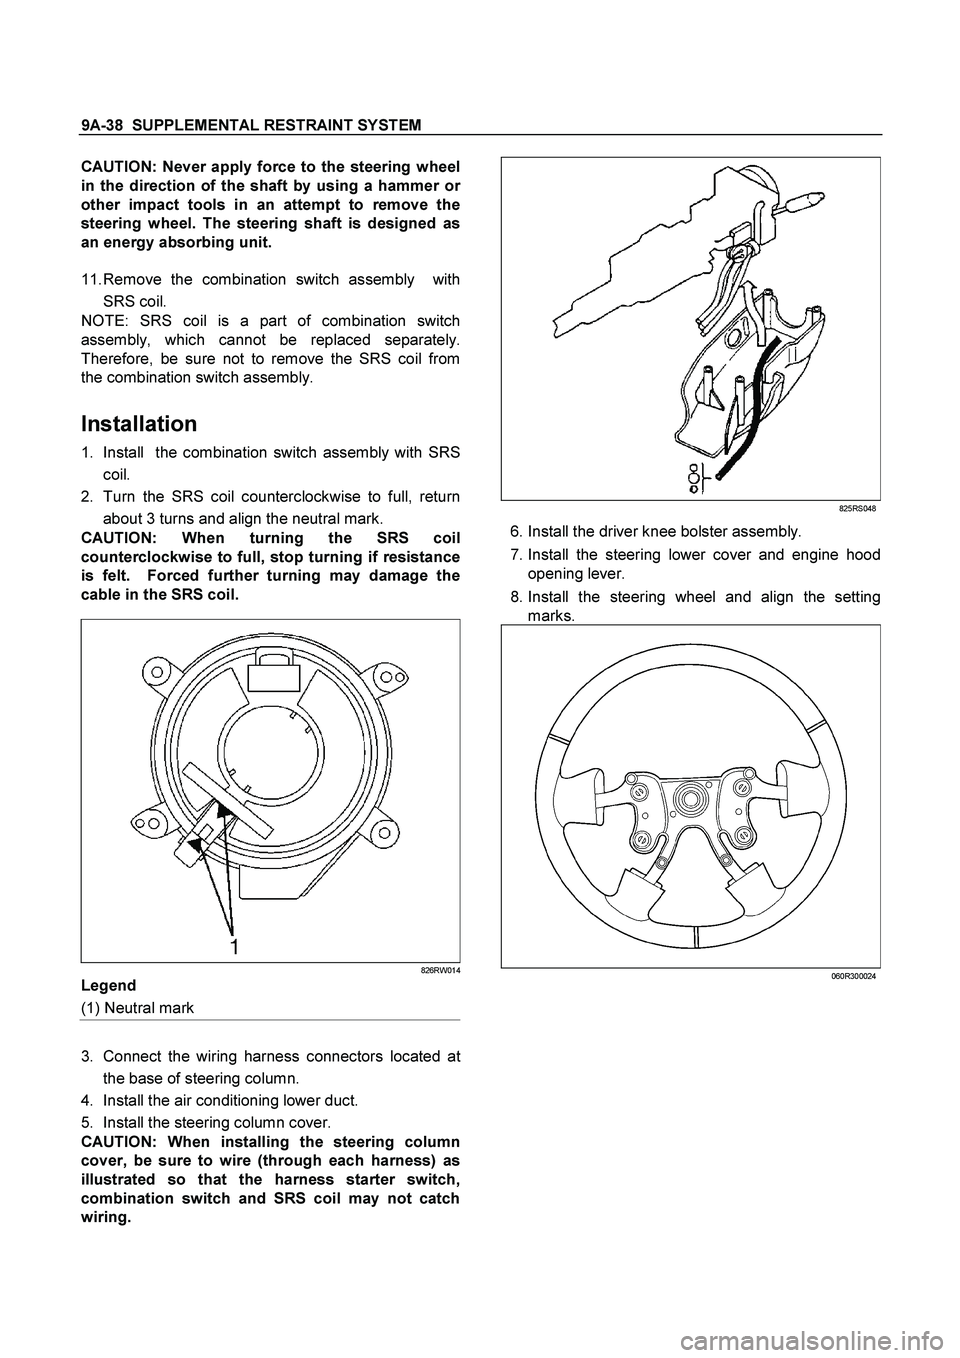 ISUZU TF SERIES 2004  Workshop Manual 9A-38  SUPPLEMENTAL RESTRAINT SYSTEM
 
CAUTION: Never apply force to the steering wheel
in the direction of the shaft by using a hammer o
r
other impact tools in an attempt to remove the
steering whee